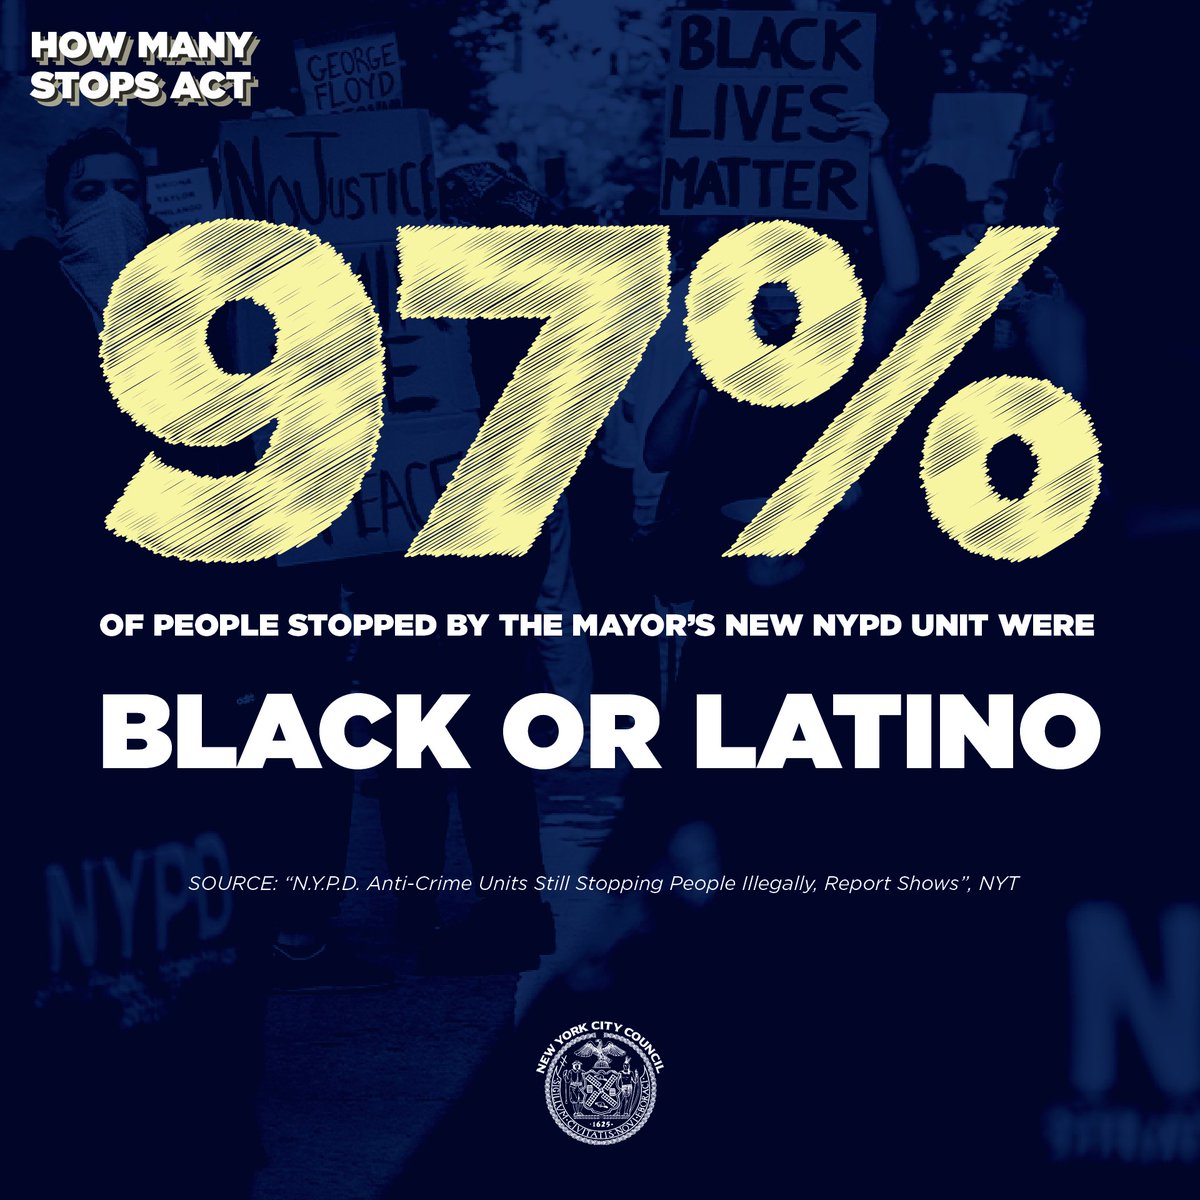 We have to be honest about reality: one in four stops made by the mayor’s newly reconstituted police unit were found to be unconstitutional by the federal monitor. 97% of these stops were of Black and Latino NYers, despite they make up less than half of NYC’s population.